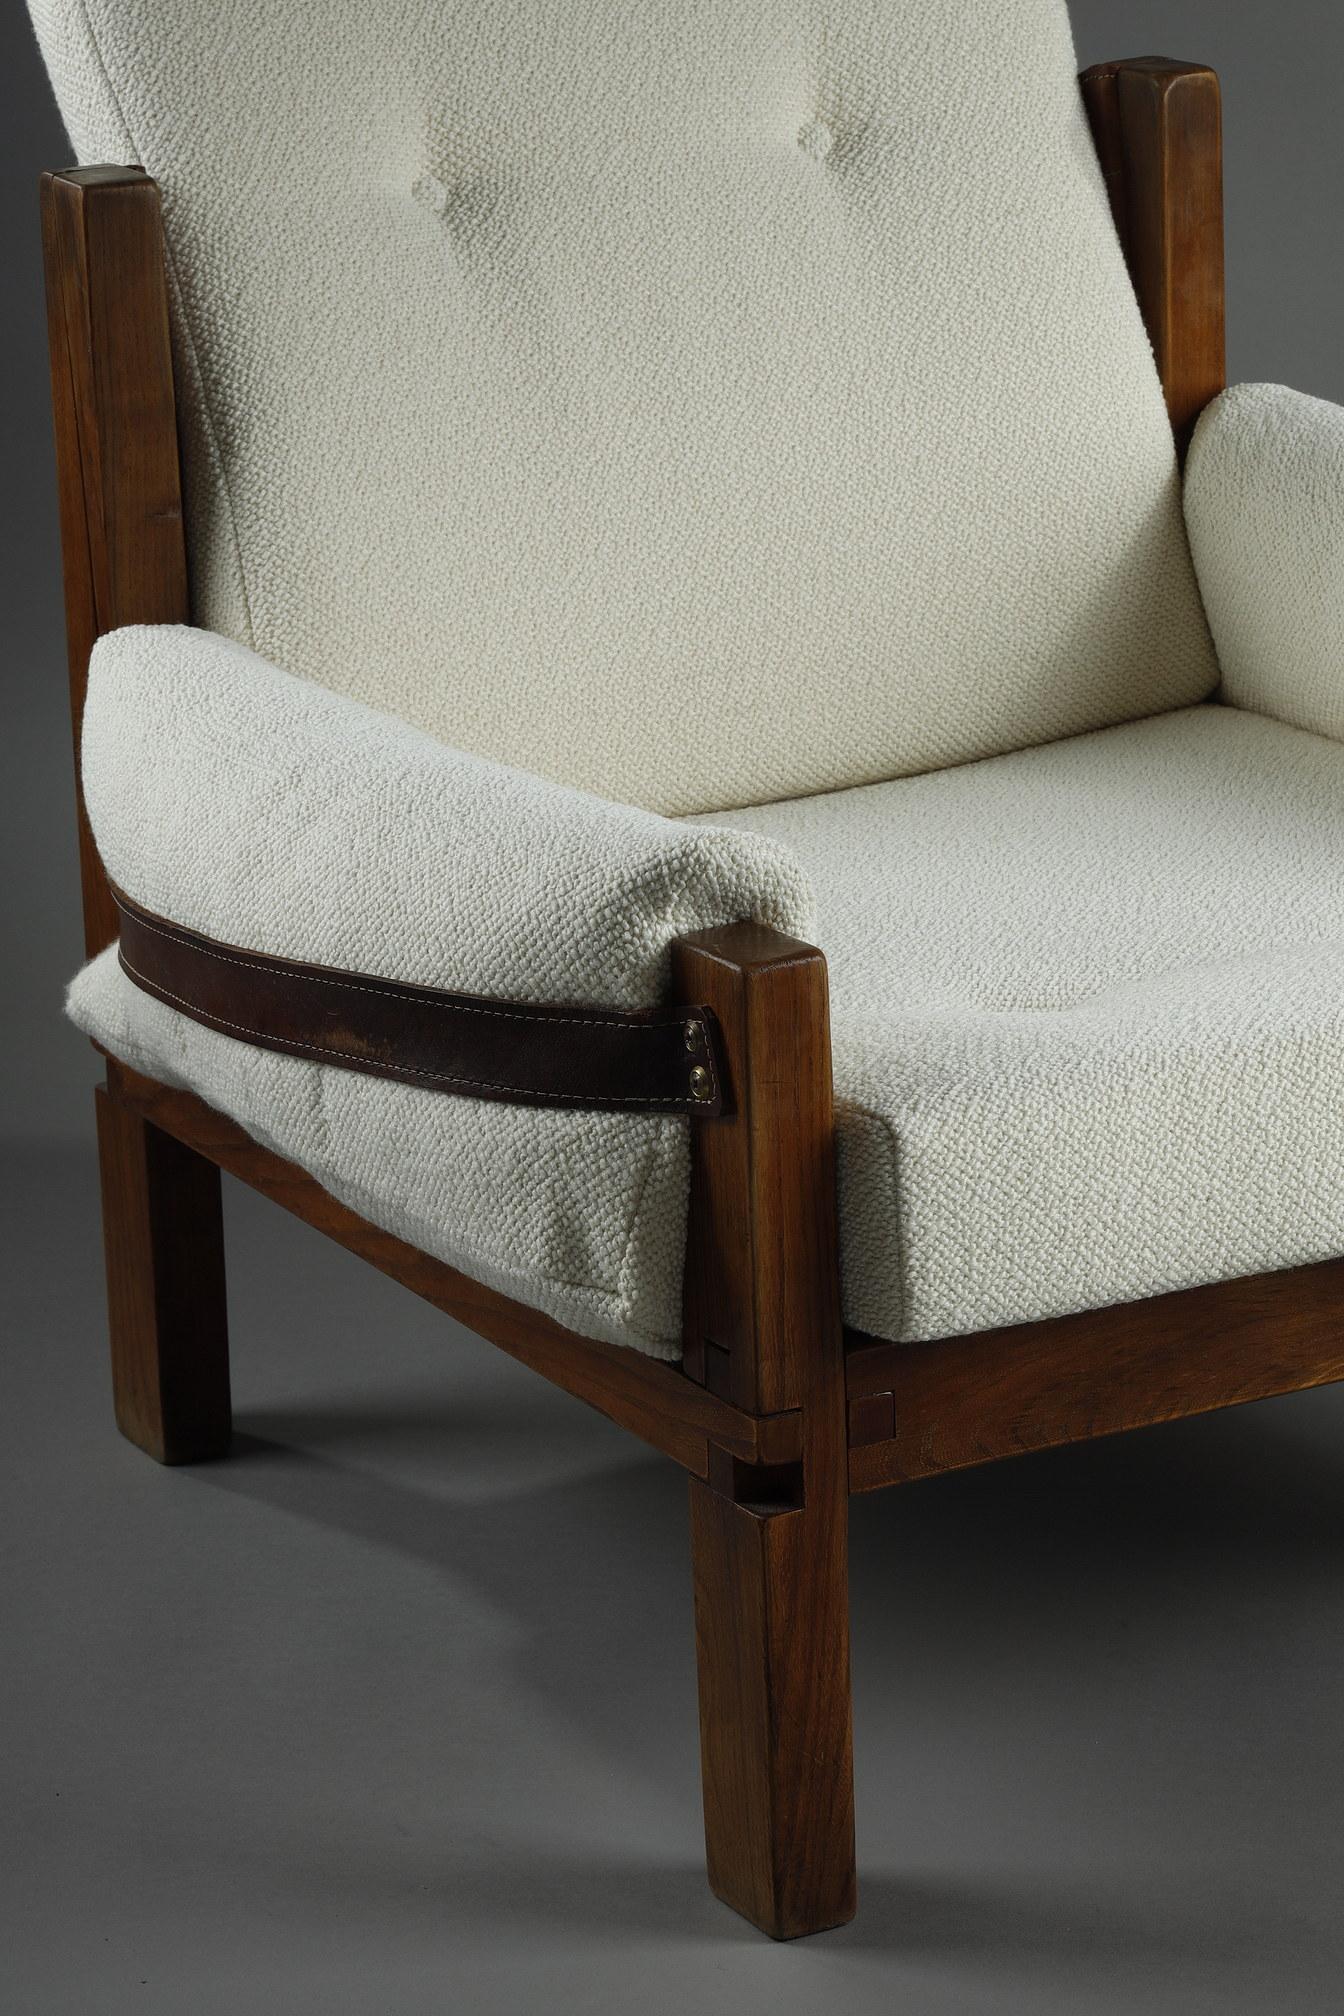 Armchair by Pierre CHAPO from the 1970s, S15 MODEL For Sale 5